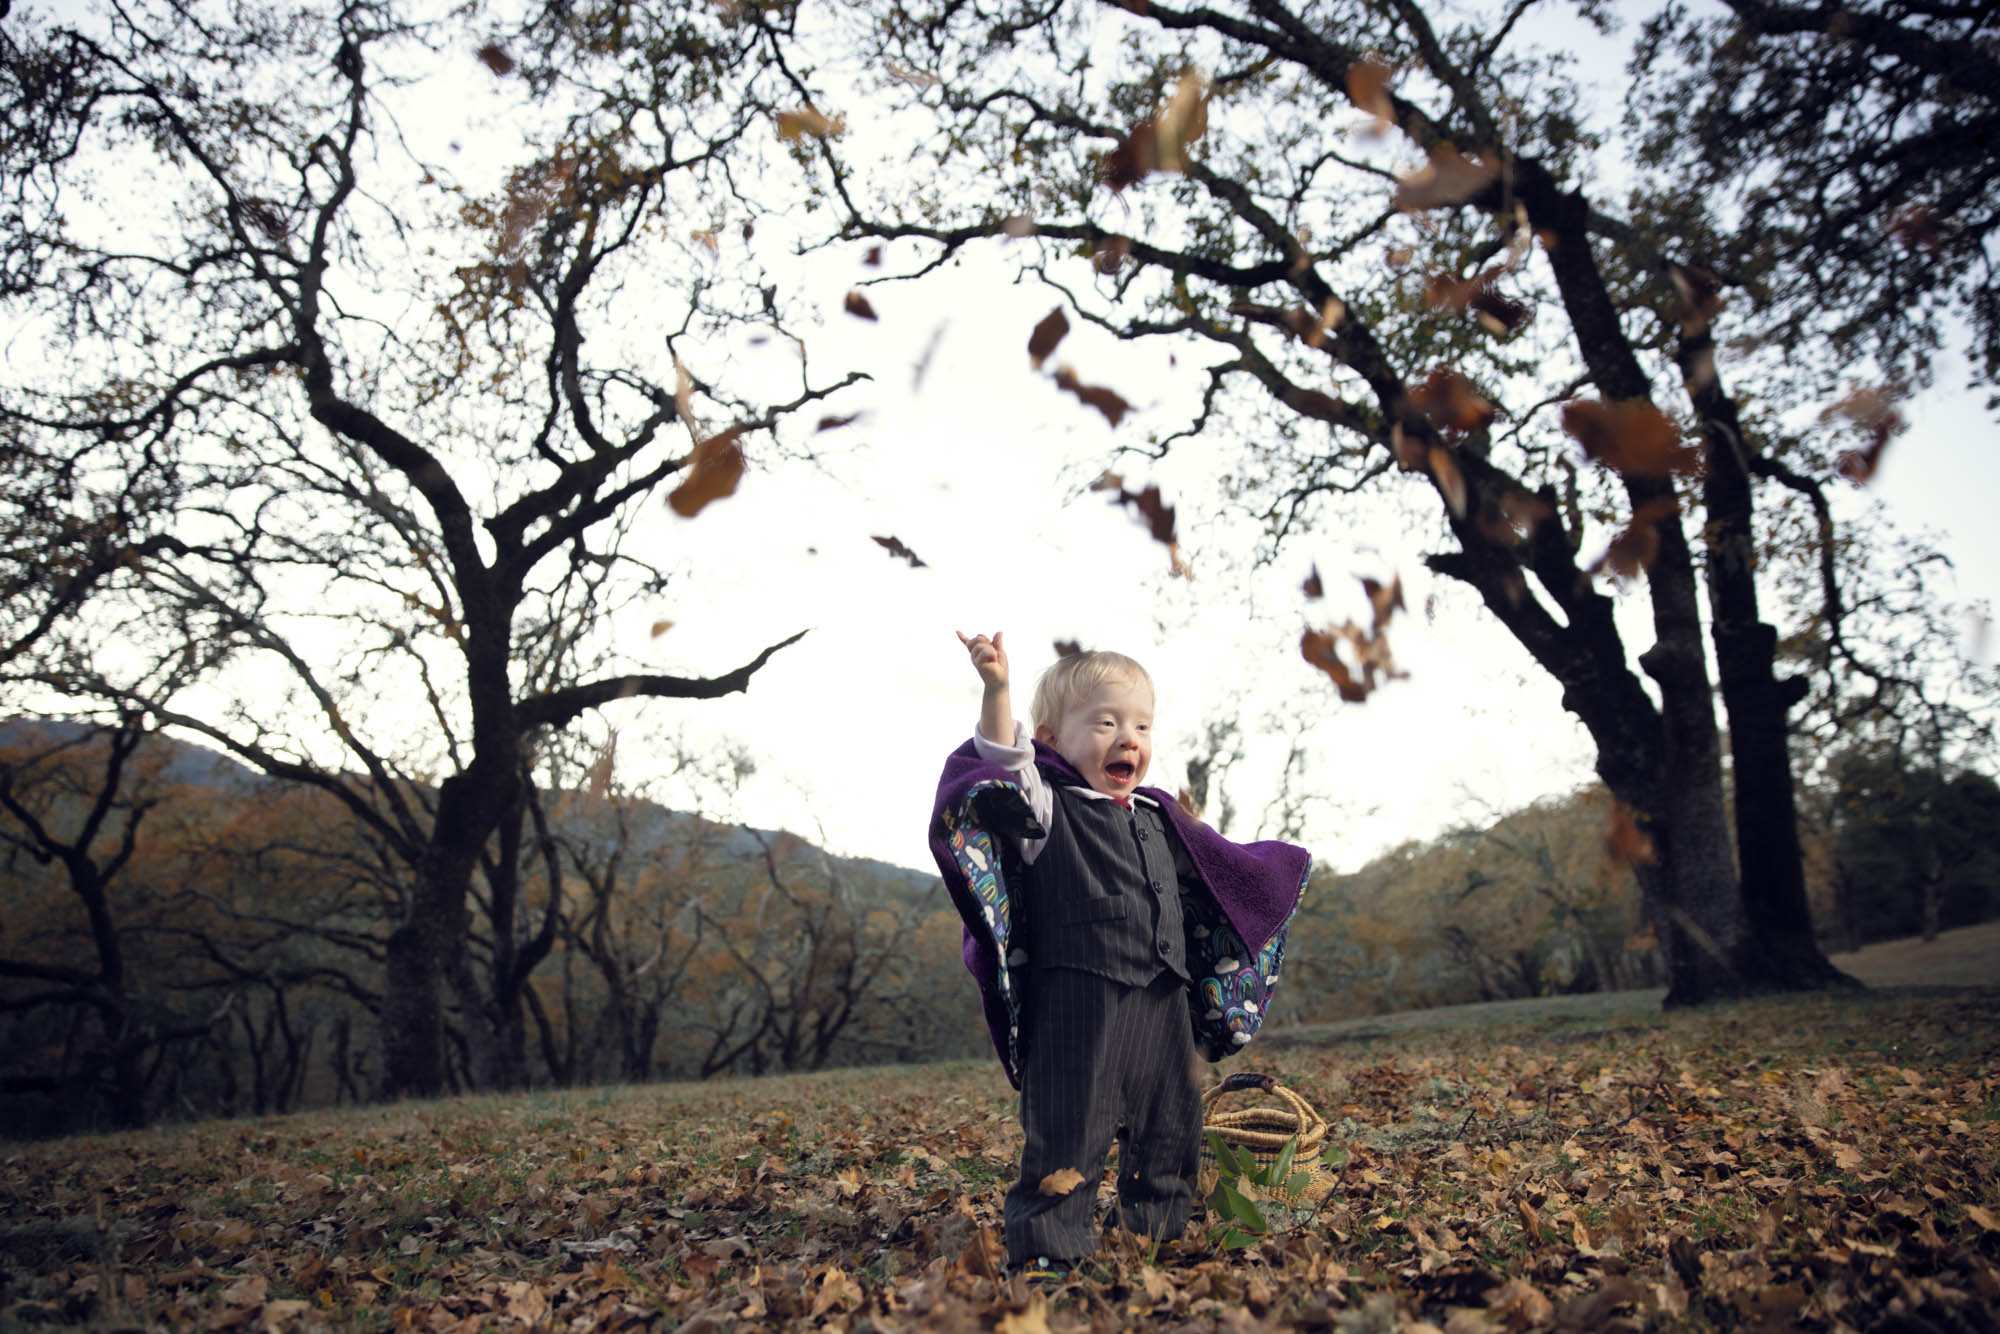 childrens portrait of a toddler wearing a cape in a bay area forest in the winter with leaves falling around him